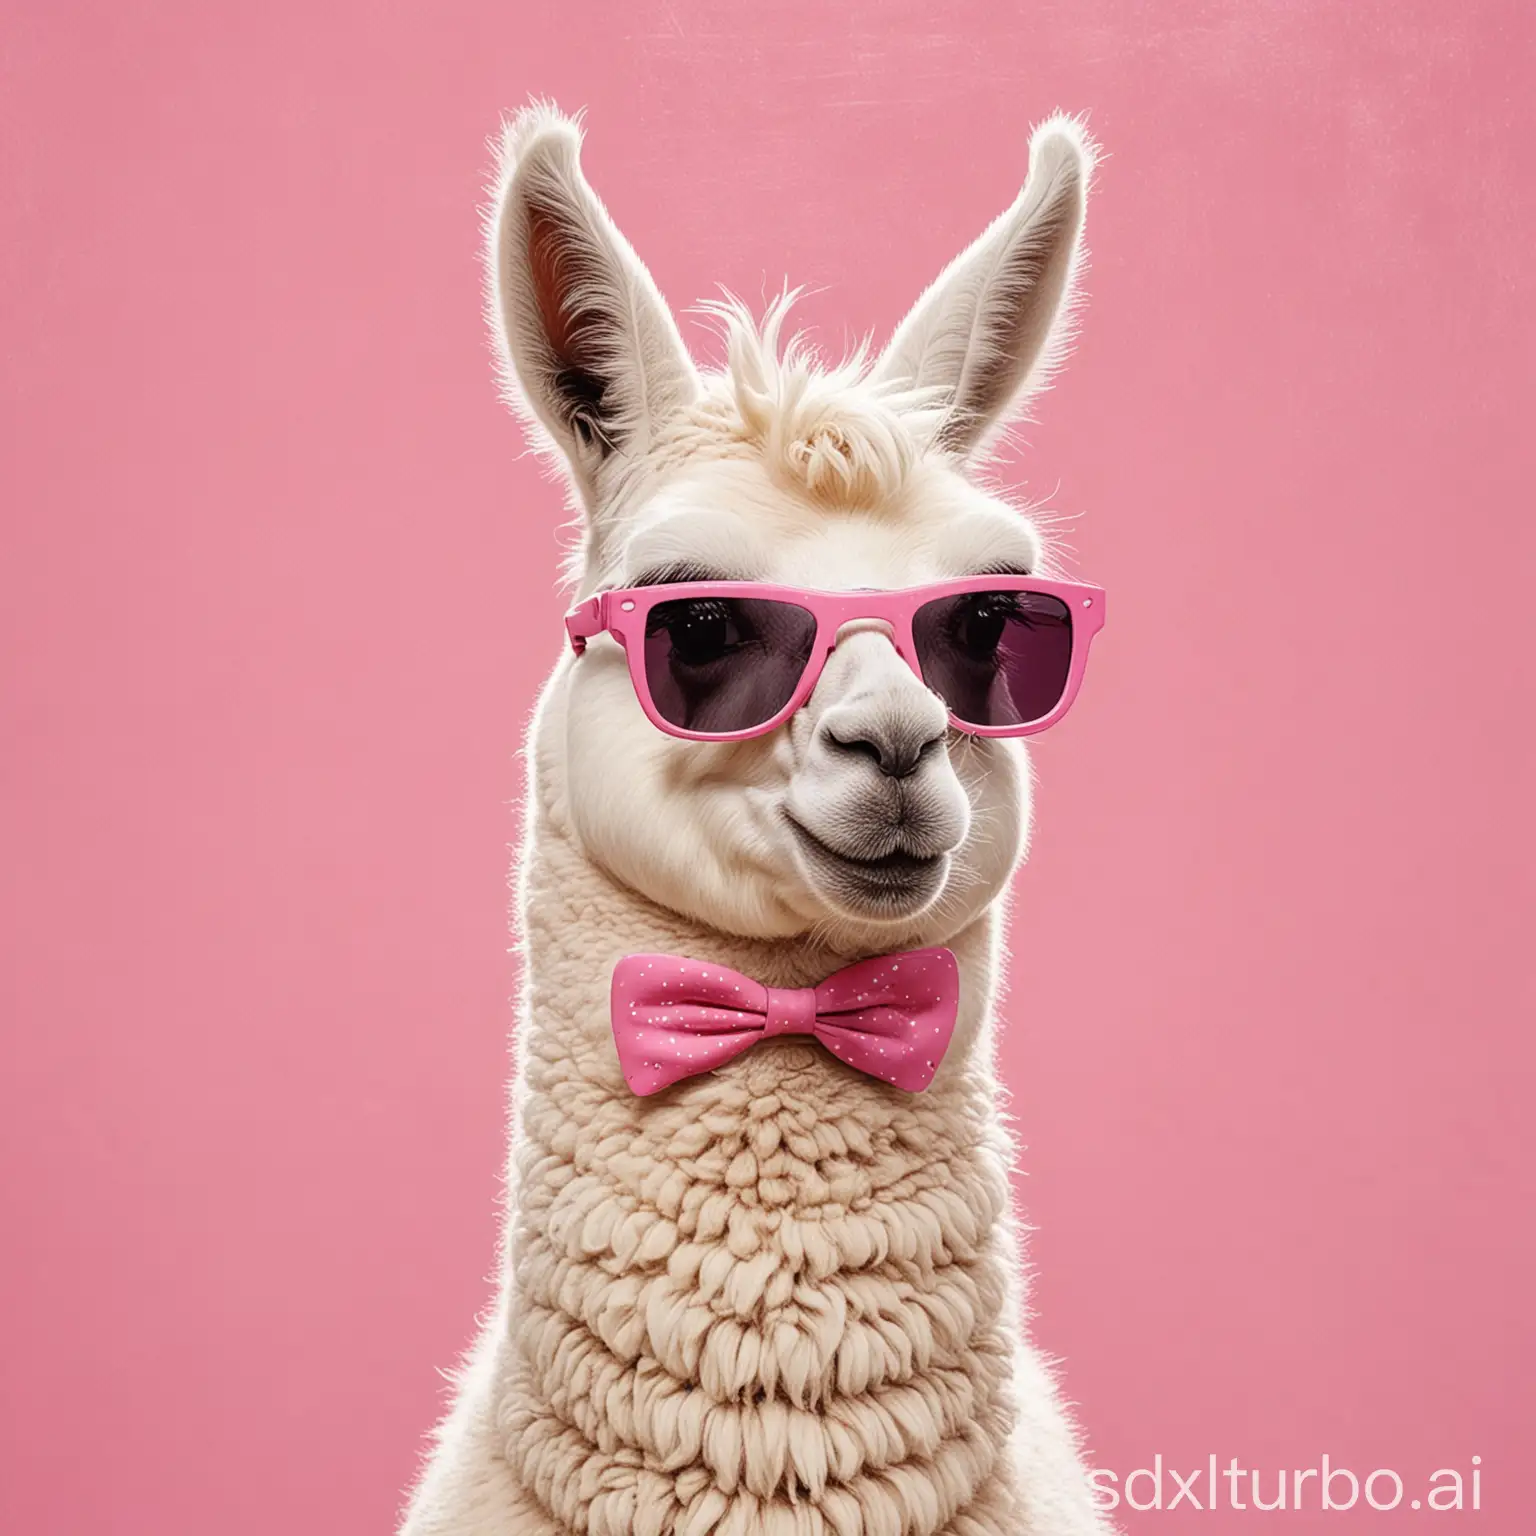 a white llama with sunglasses painting on a pink